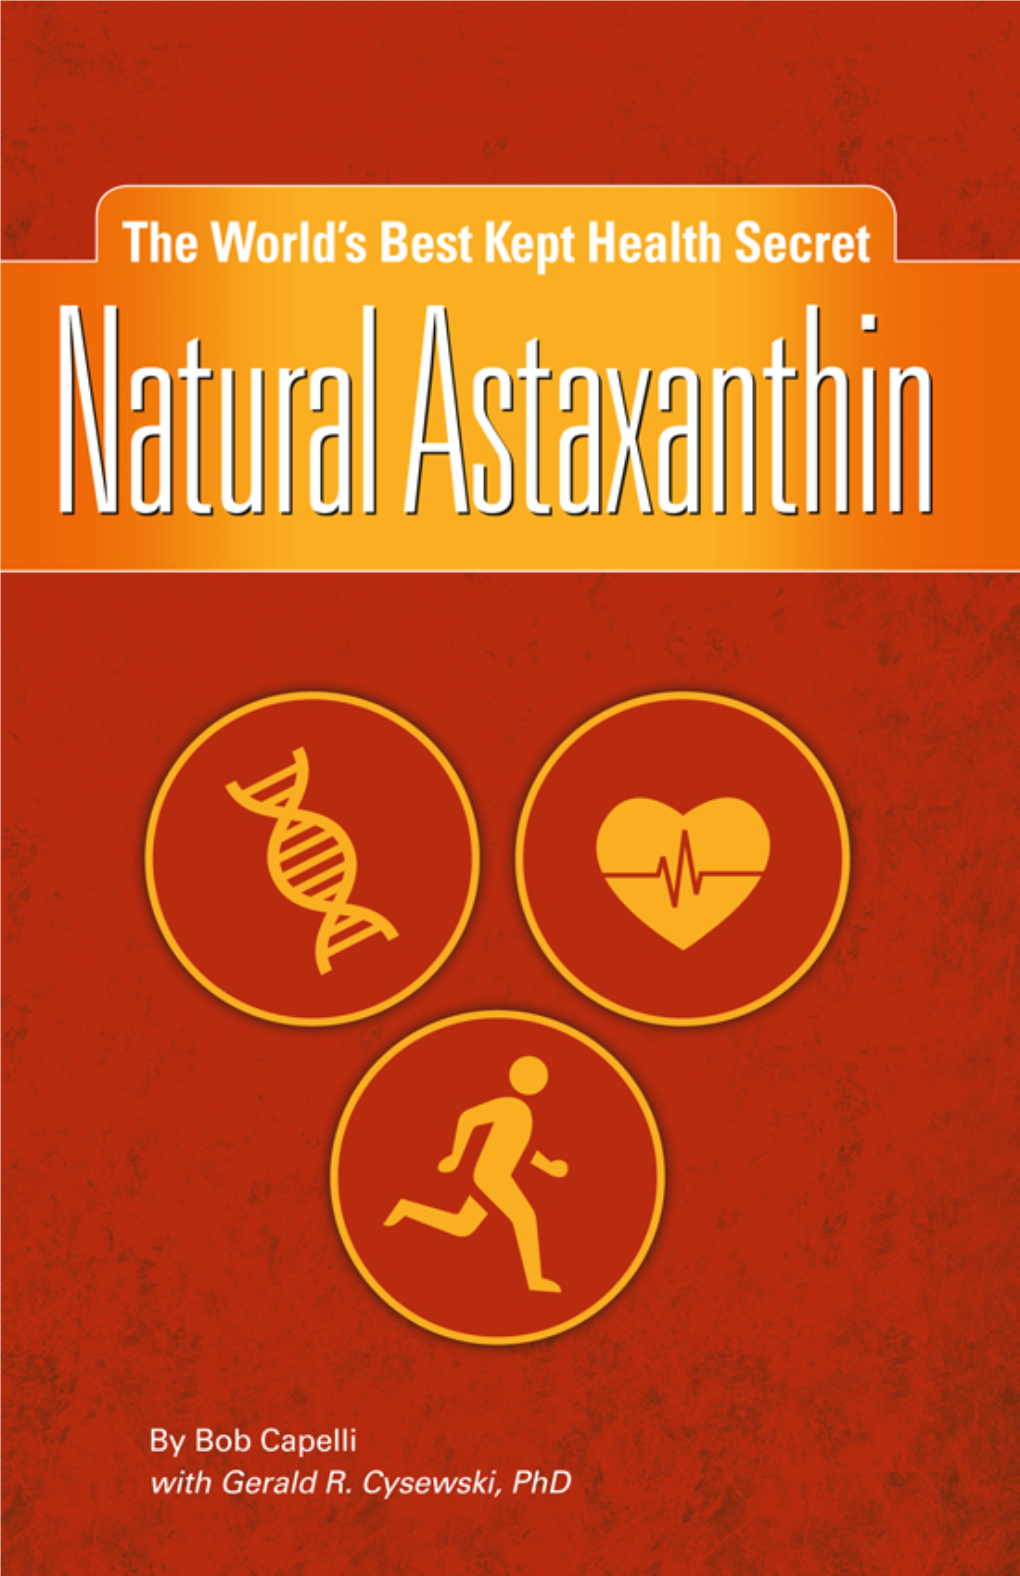 NATURAL ASTAXANTHIN by Bob Capelli with Dr